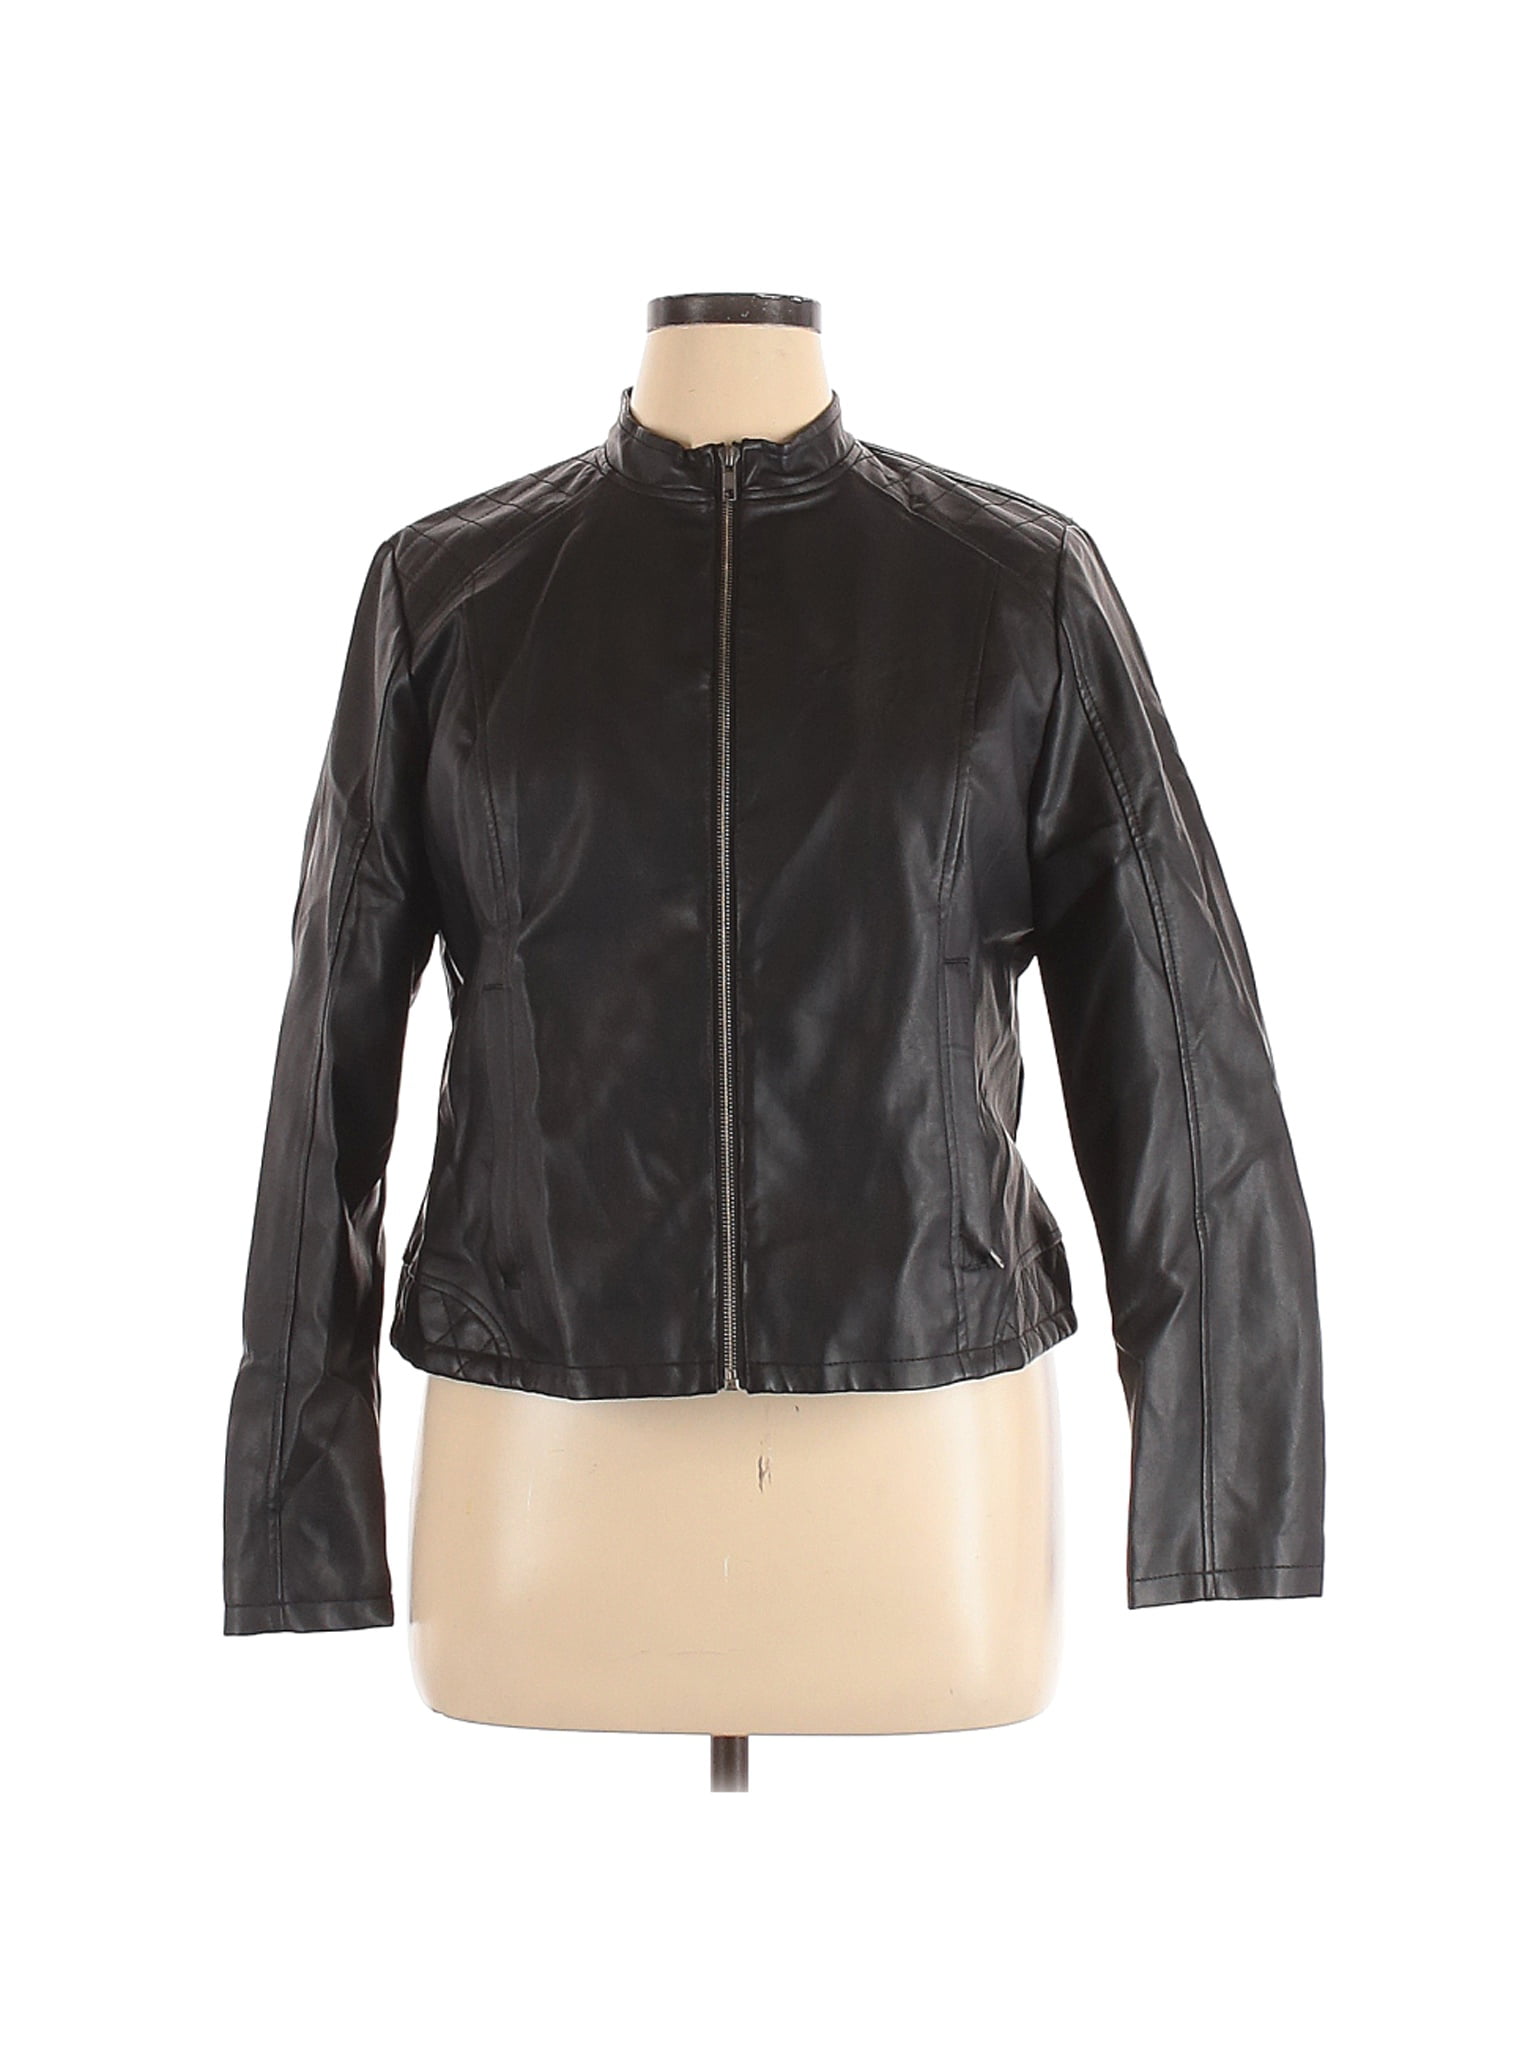 Baccini - Pre-Owned Baccini Women's Size XL Faux Leather Jacket ...